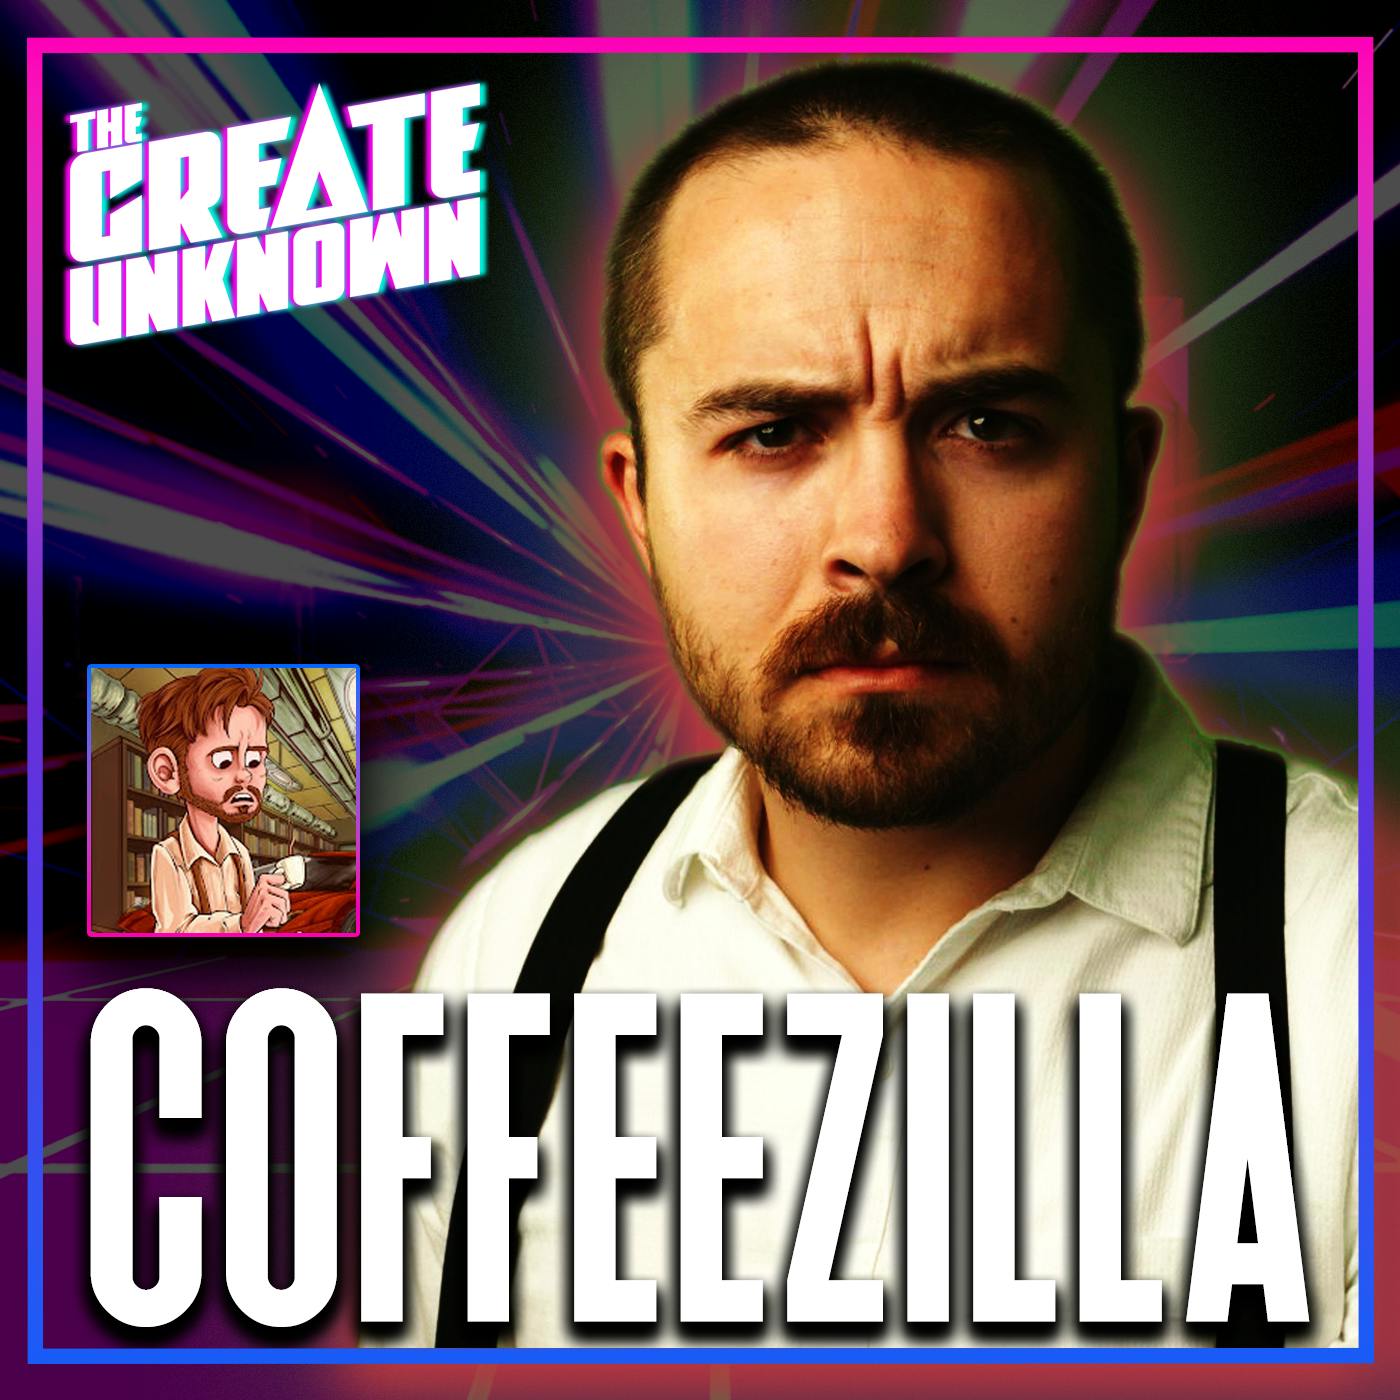 Safemoon and the Evolution of CoffeeZilla